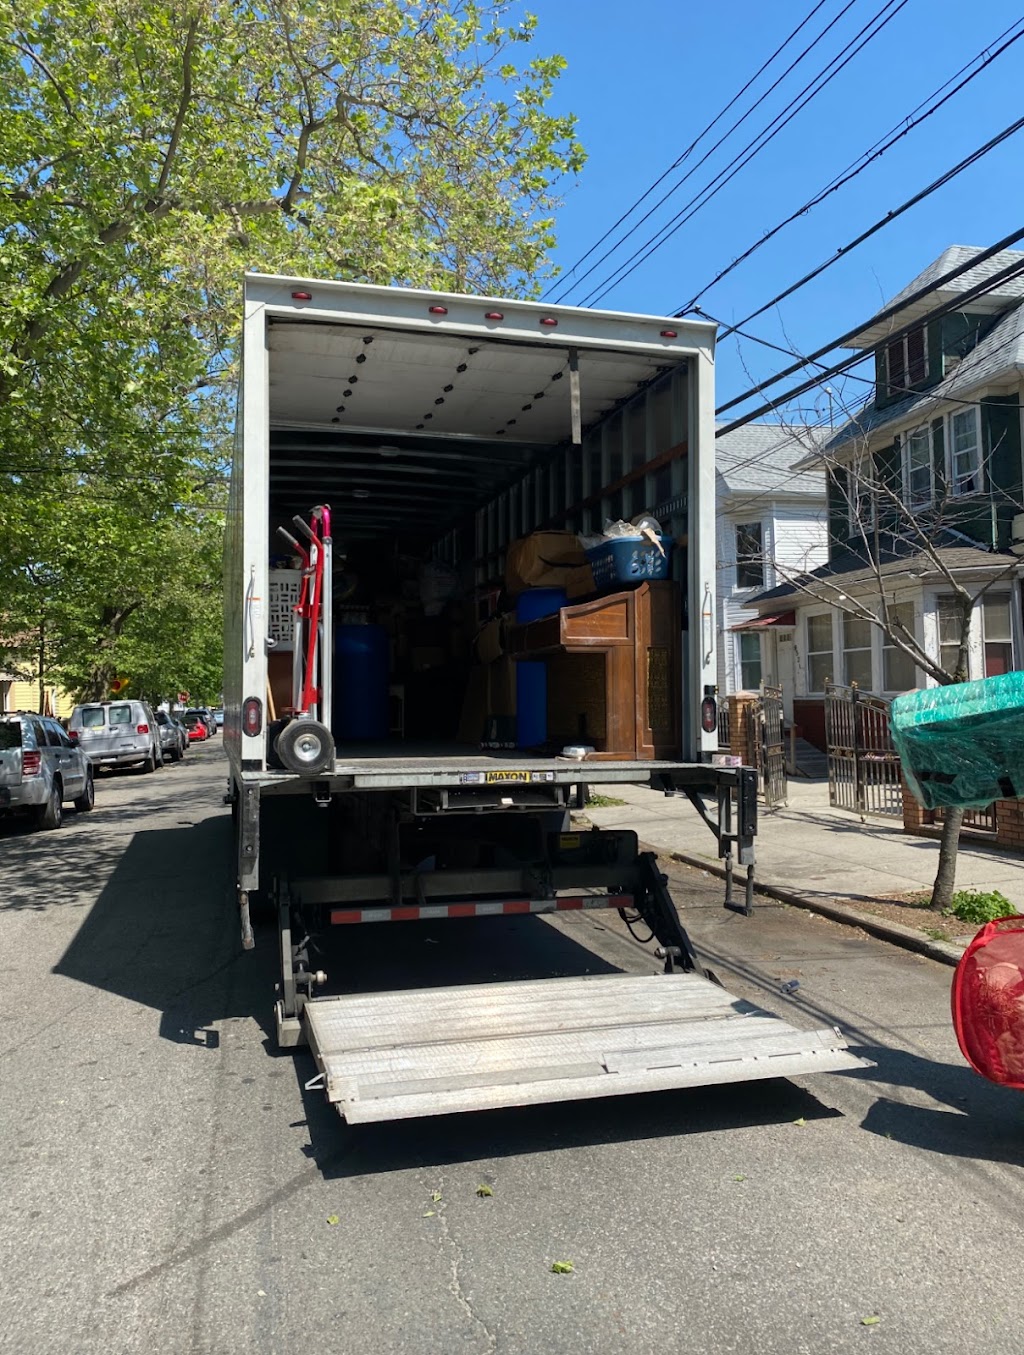 Reliable Moving & Junk Removal | 89-23 212th Pl, Queens, NY 11428 | Phone: (347) 279-0792